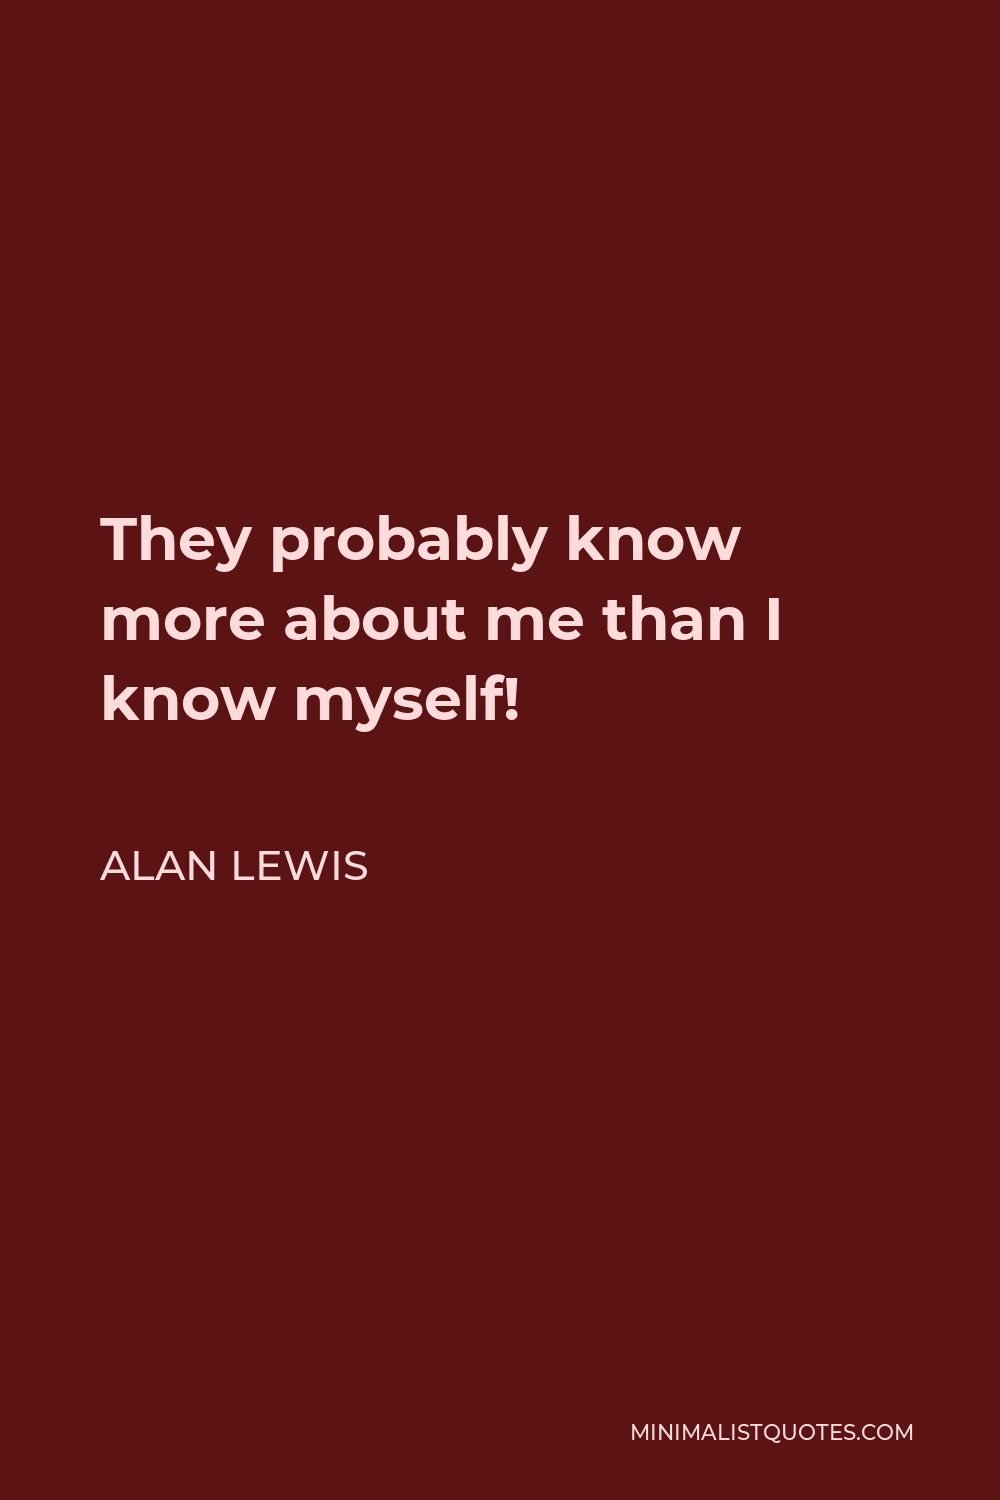 Alan Lewis Quote - They probably know more about me than I know myself!